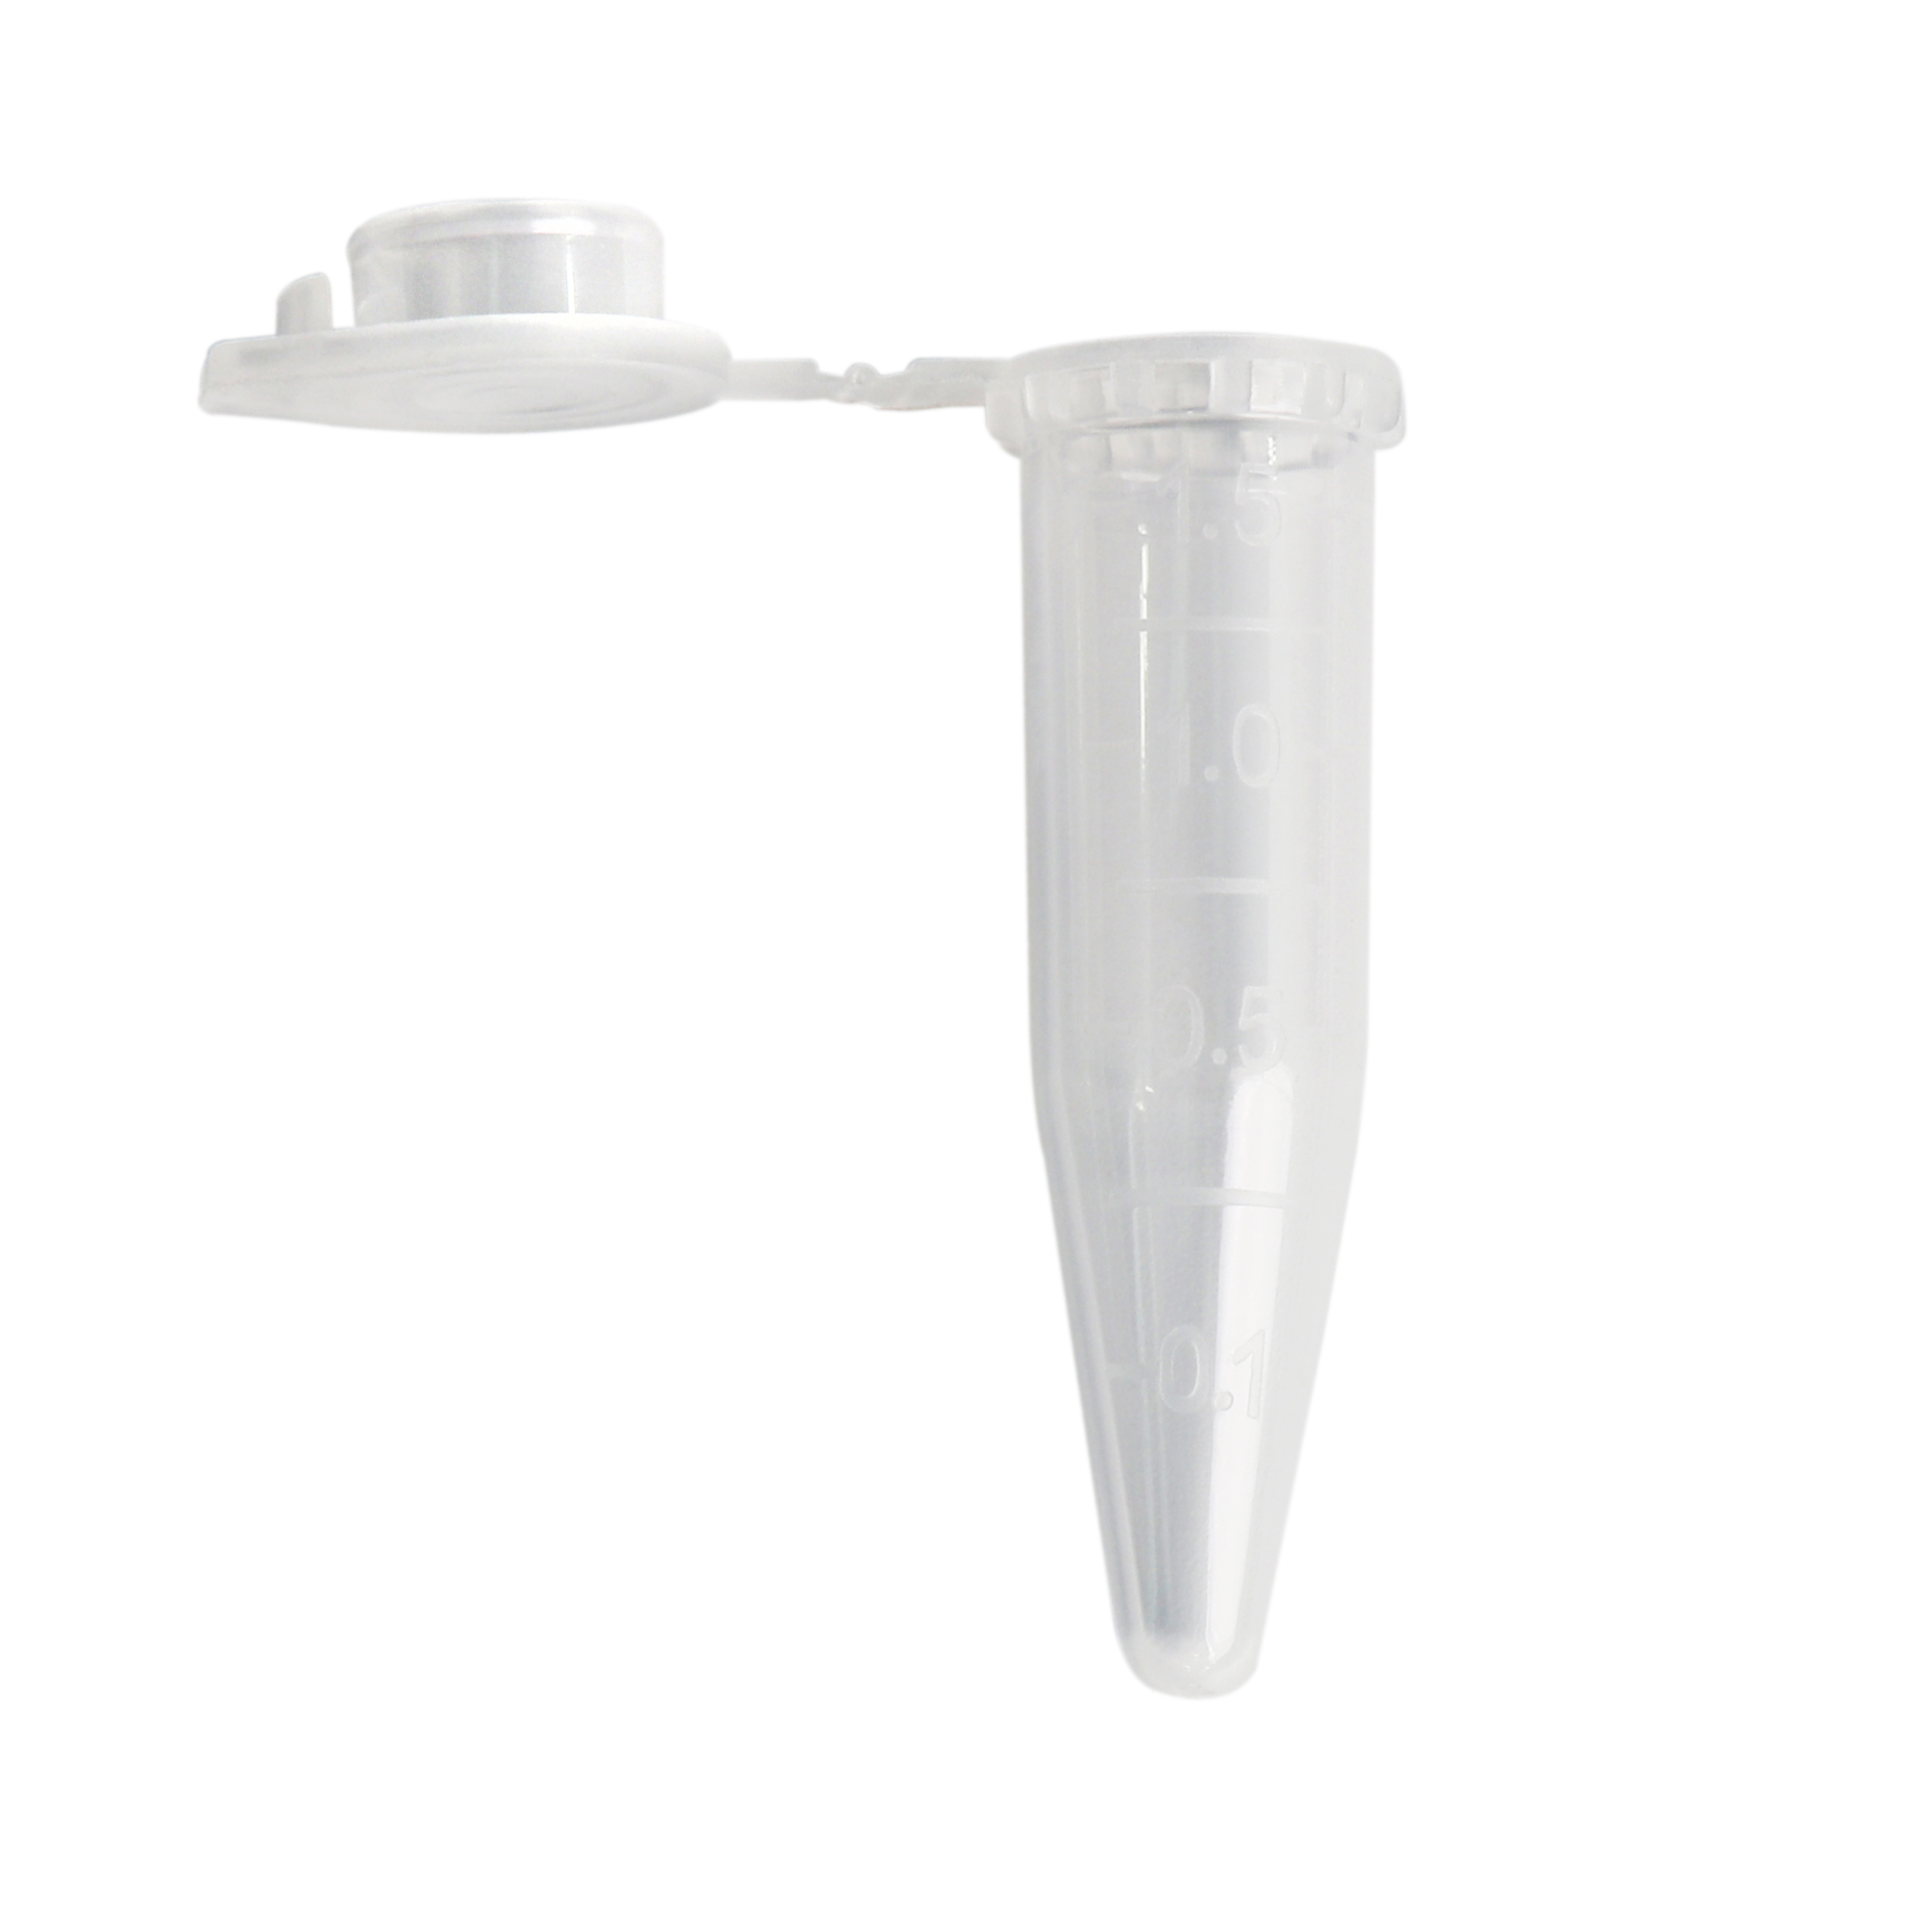 ULAB Scientific Autoclavable Microcentrifuge Tubes 1.5ml with Hinged Lid, Falcon Tube, Frosted Writing Area, Polypropylene Graduated Microcentrifuge Tubes, Pack of 500, UCT1003